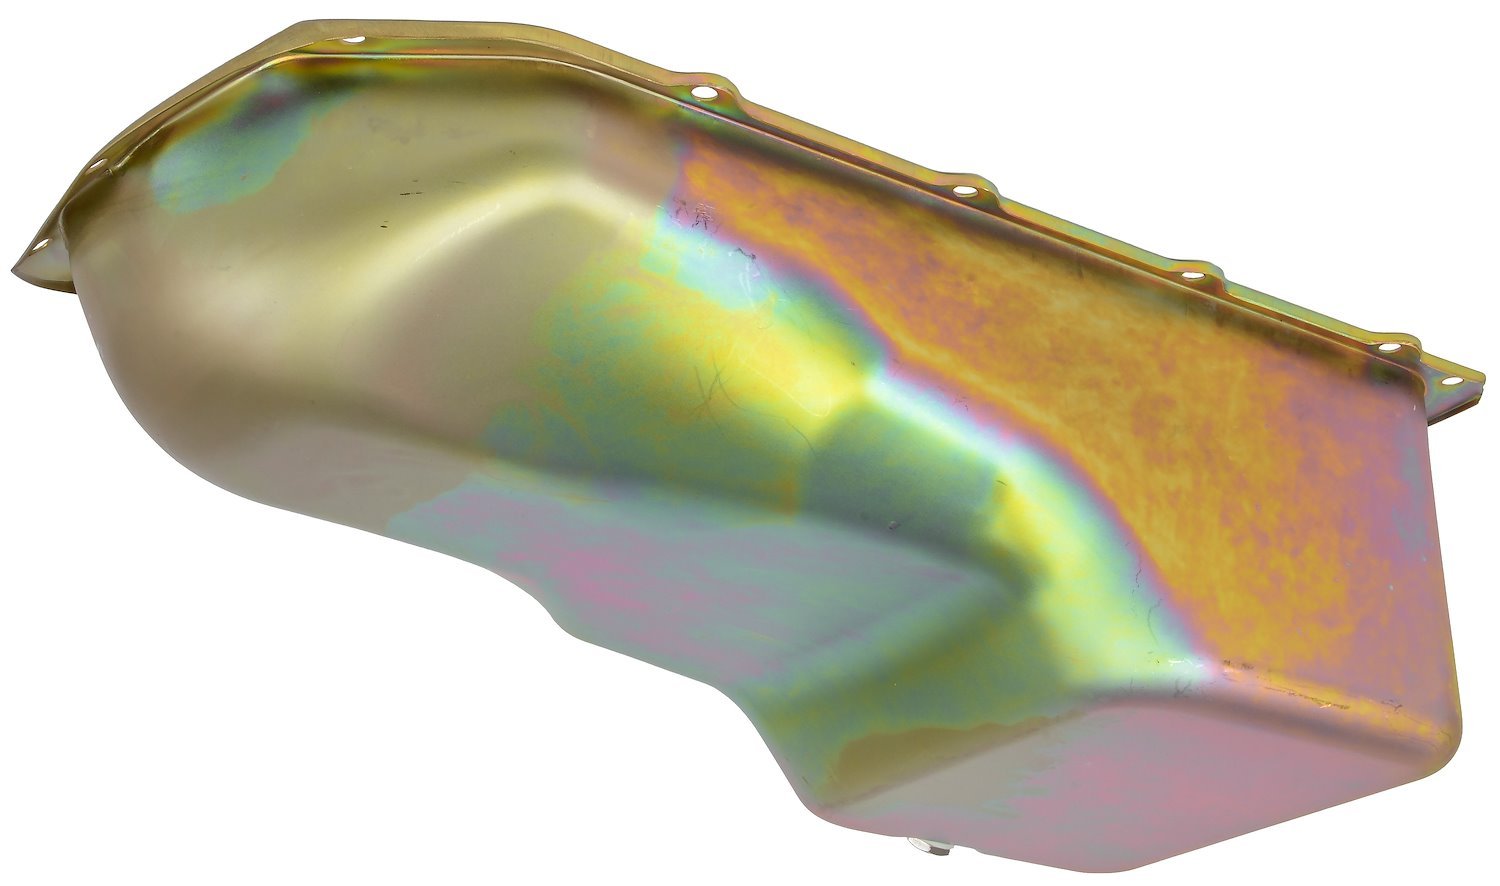 Stock-Style Replacement Oil Pan for 1959-1981 Pontiac 265-455 V8 [Gold Zinc]